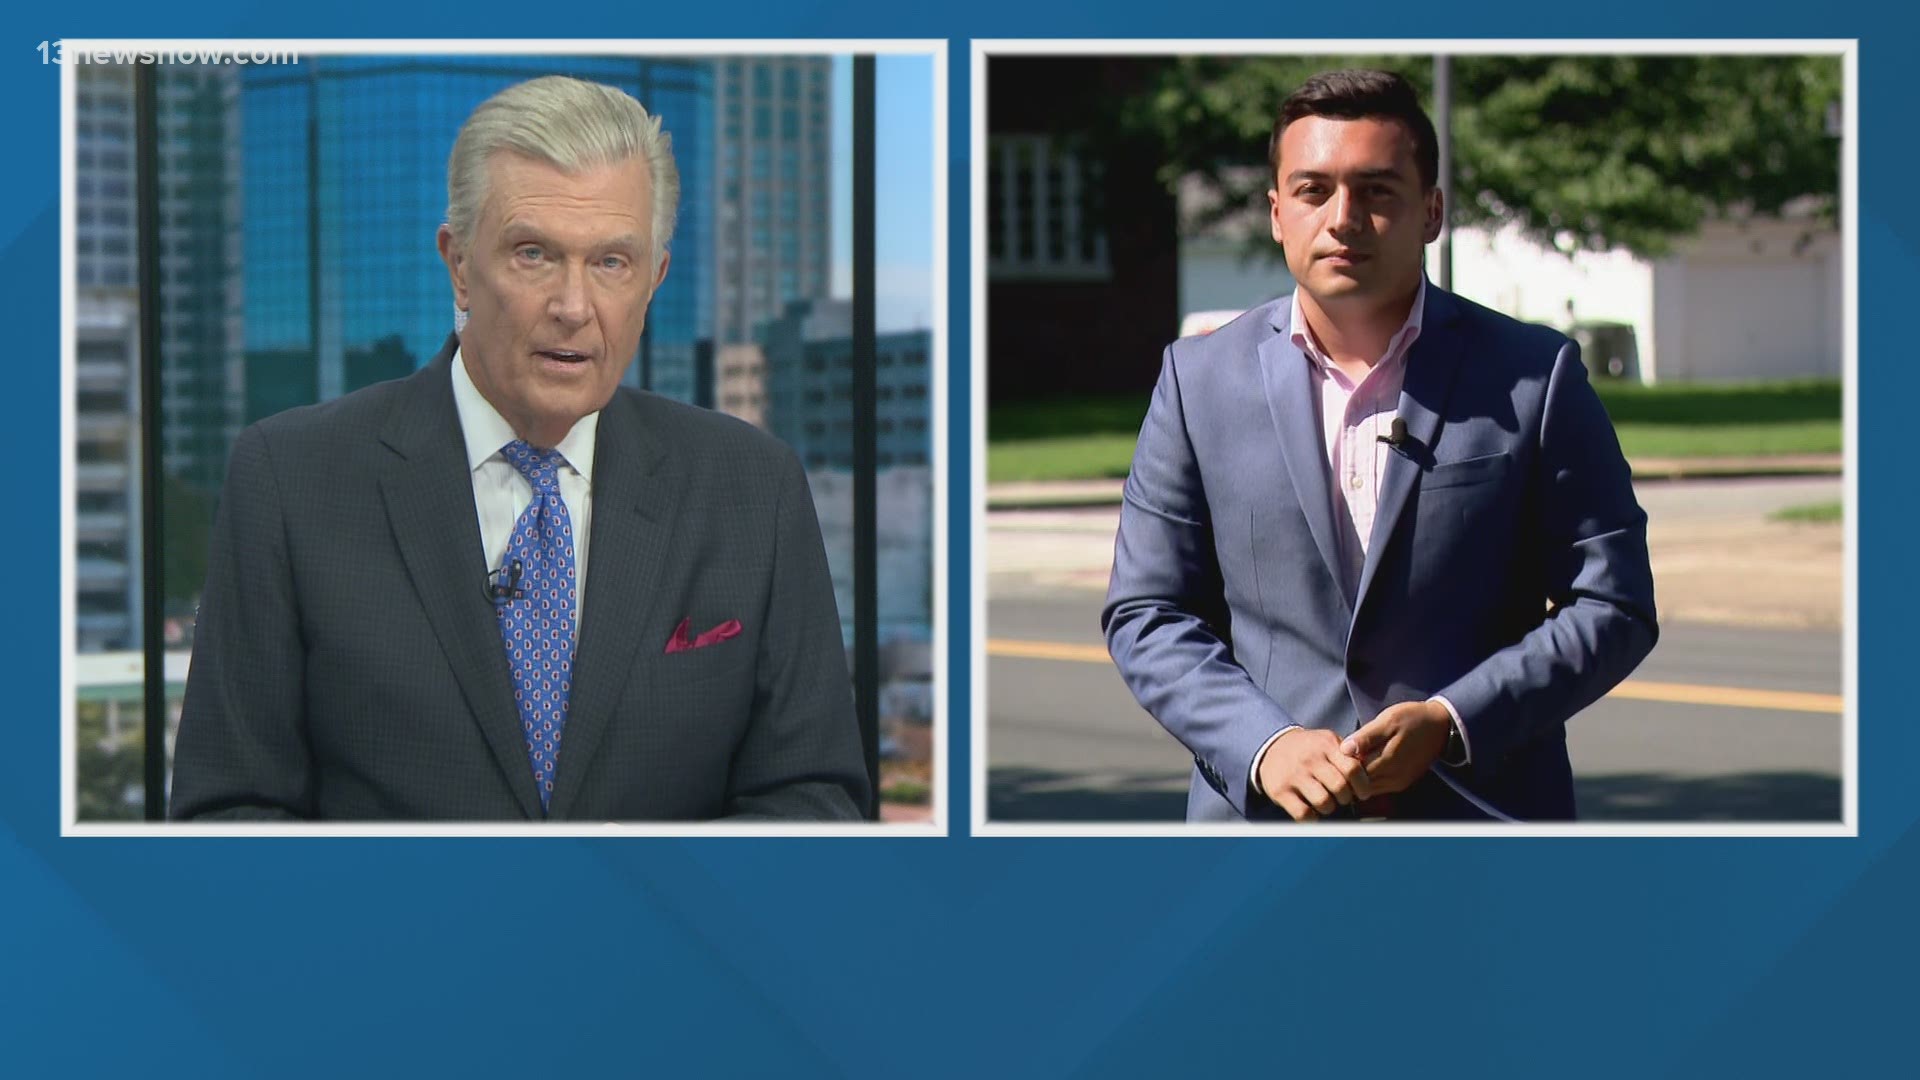 Top stories: 13News Now at 4 p.m. with Janet Roach and David Alan, June 18, 2021.